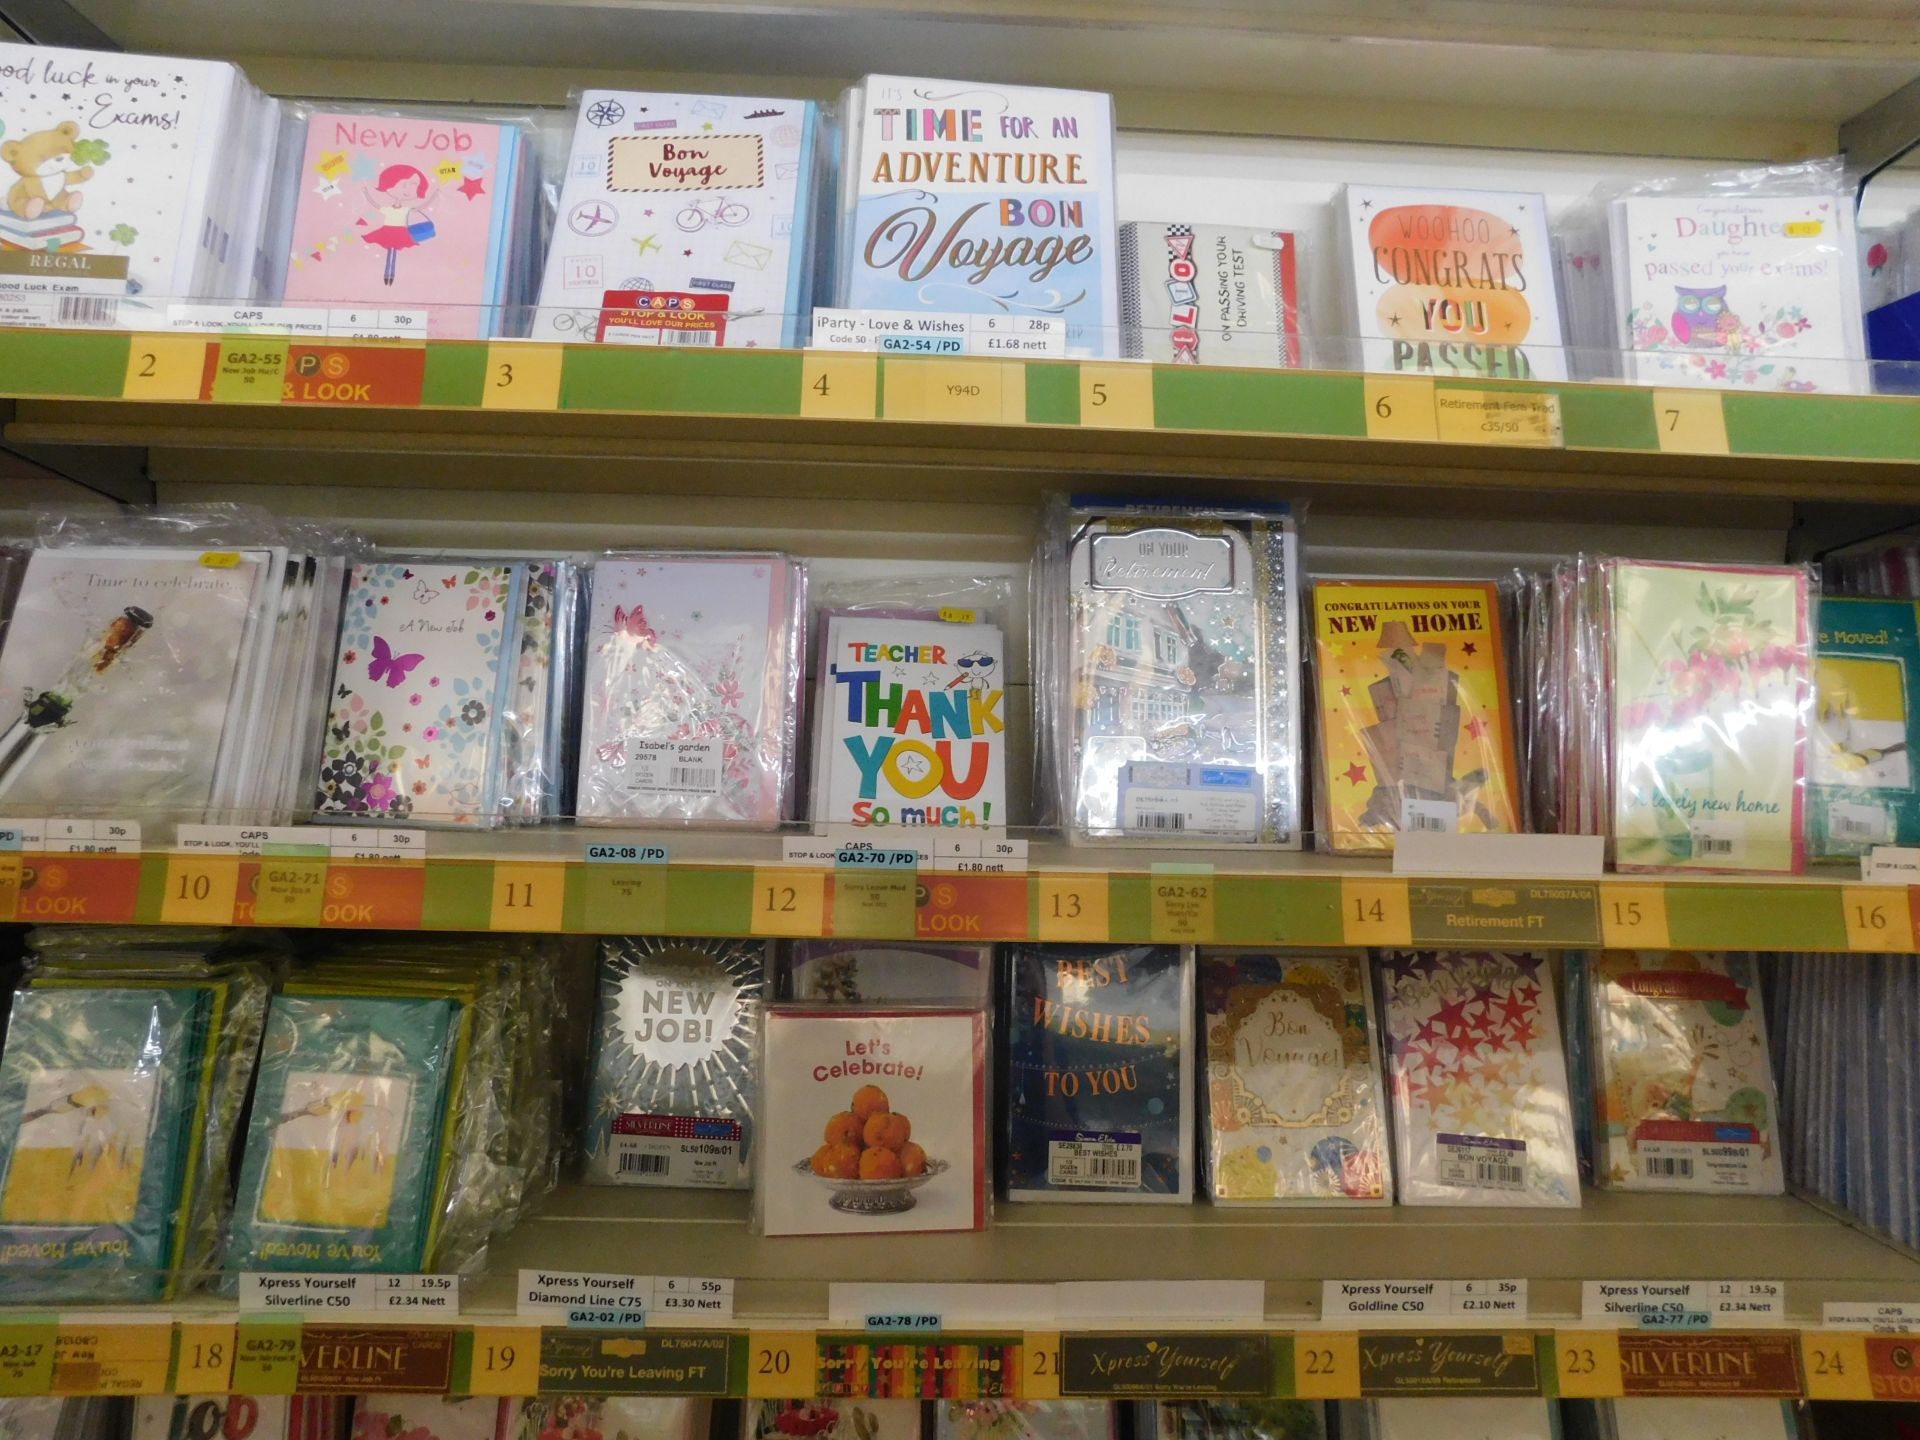 Approximately 23,500 Wedding Occasions & Celebrations Greeting Cards (Packs of 6) (Location Bury. - Image 5 of 18